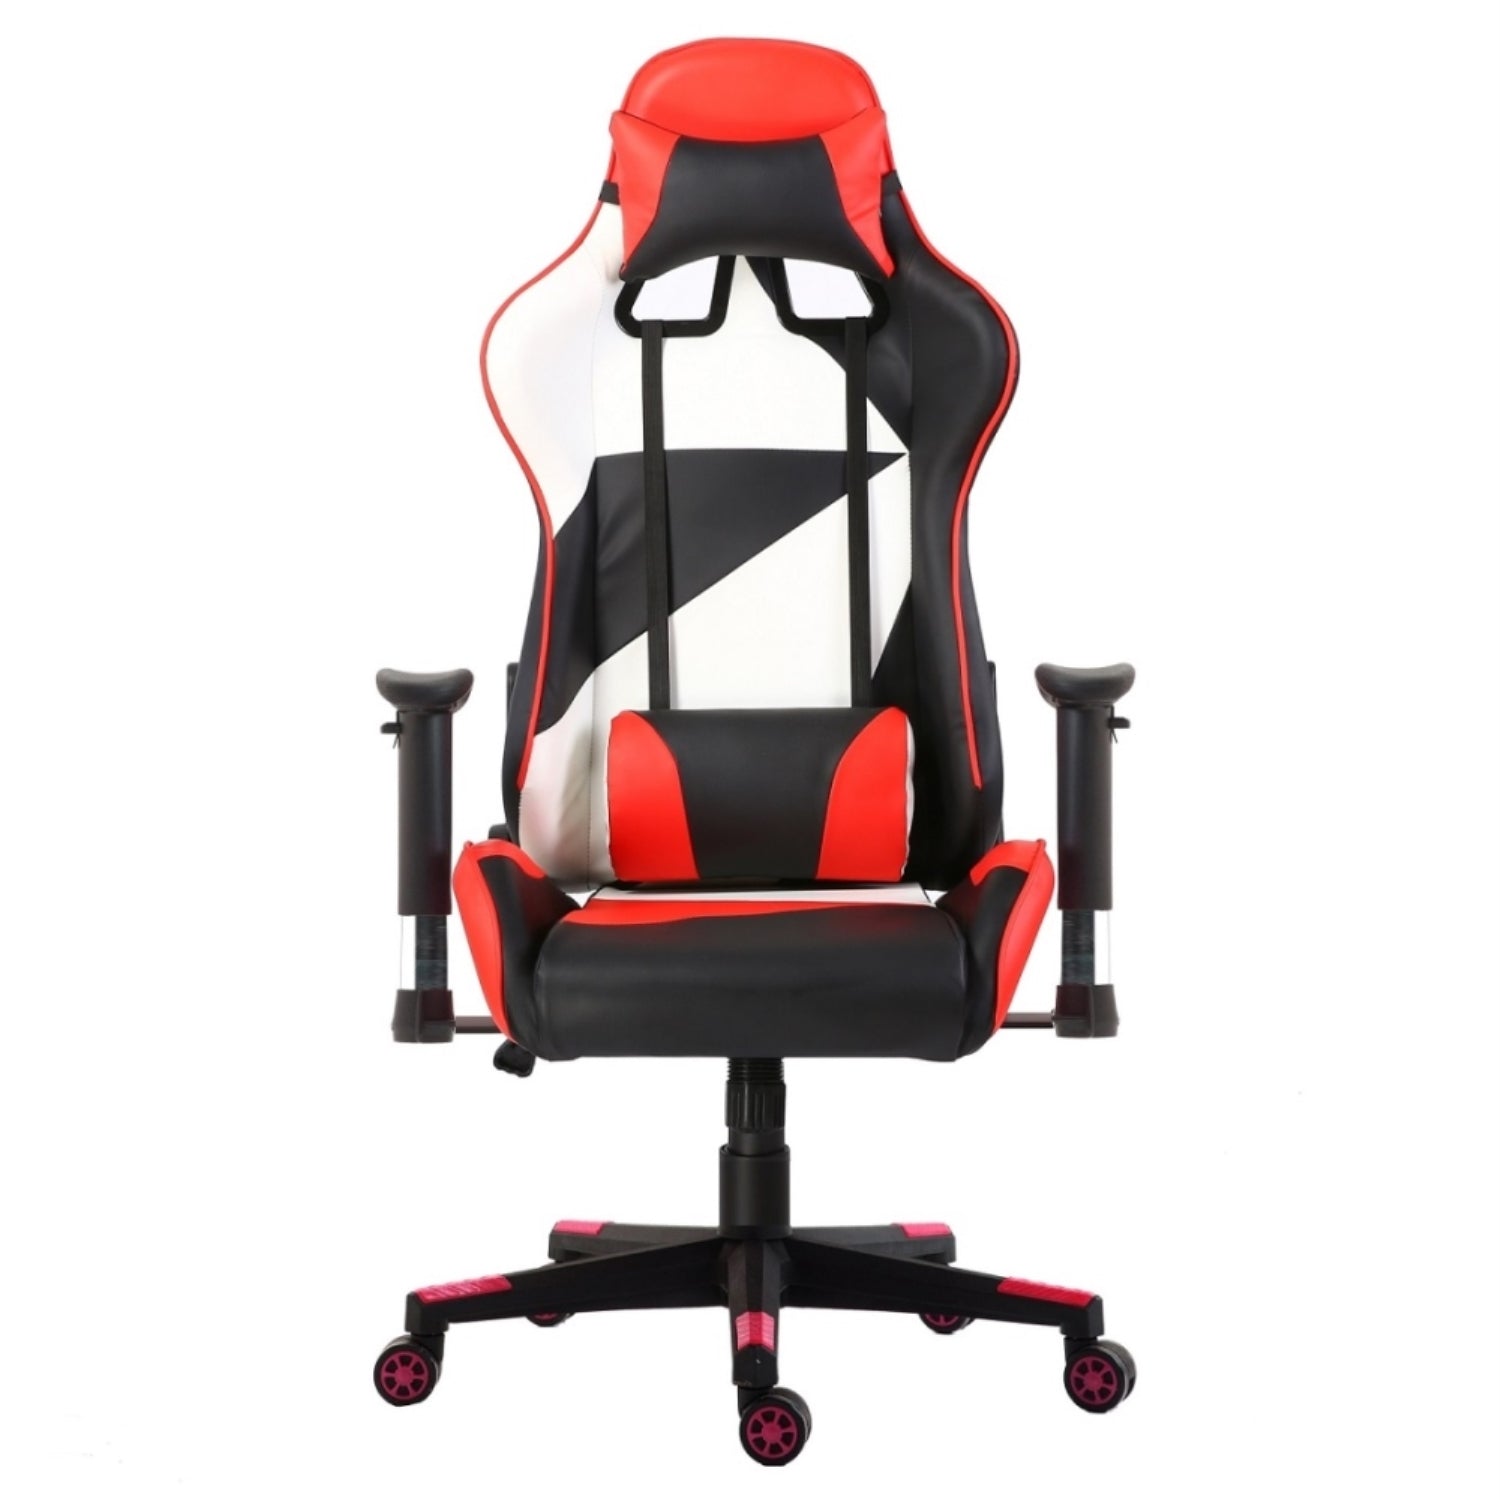 ViscoLogic LIBERTY Racing Style with Headrest and Lumbar Support Pillows Home Office Gaming Chair (Black & Red & White)